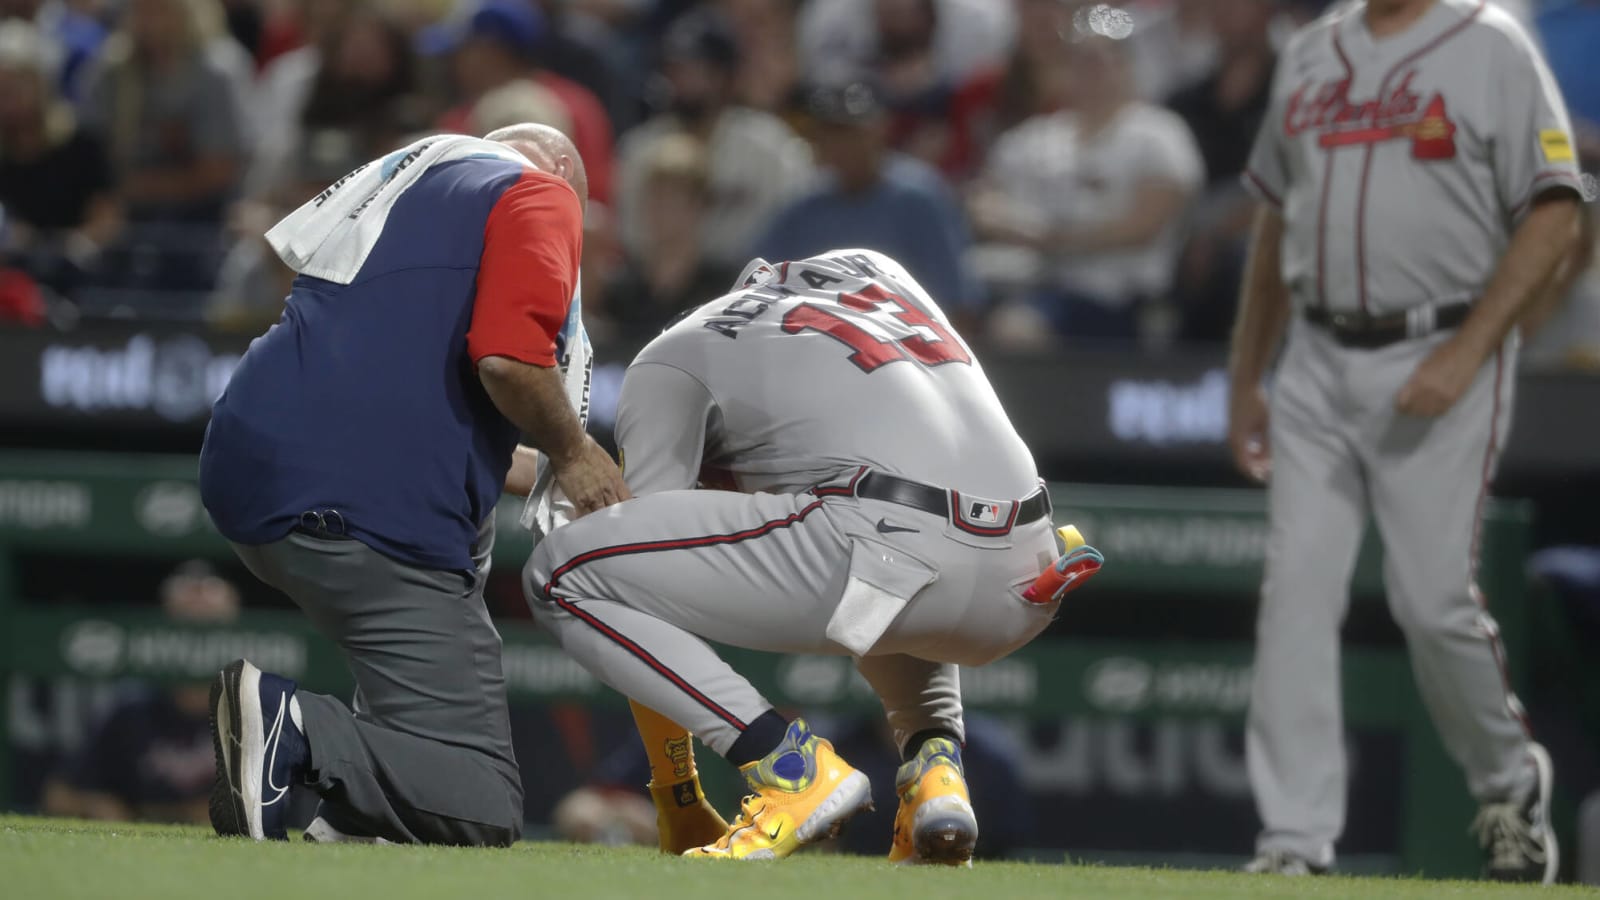  Ronald Acuña Jr. exits game after being hit by pitch